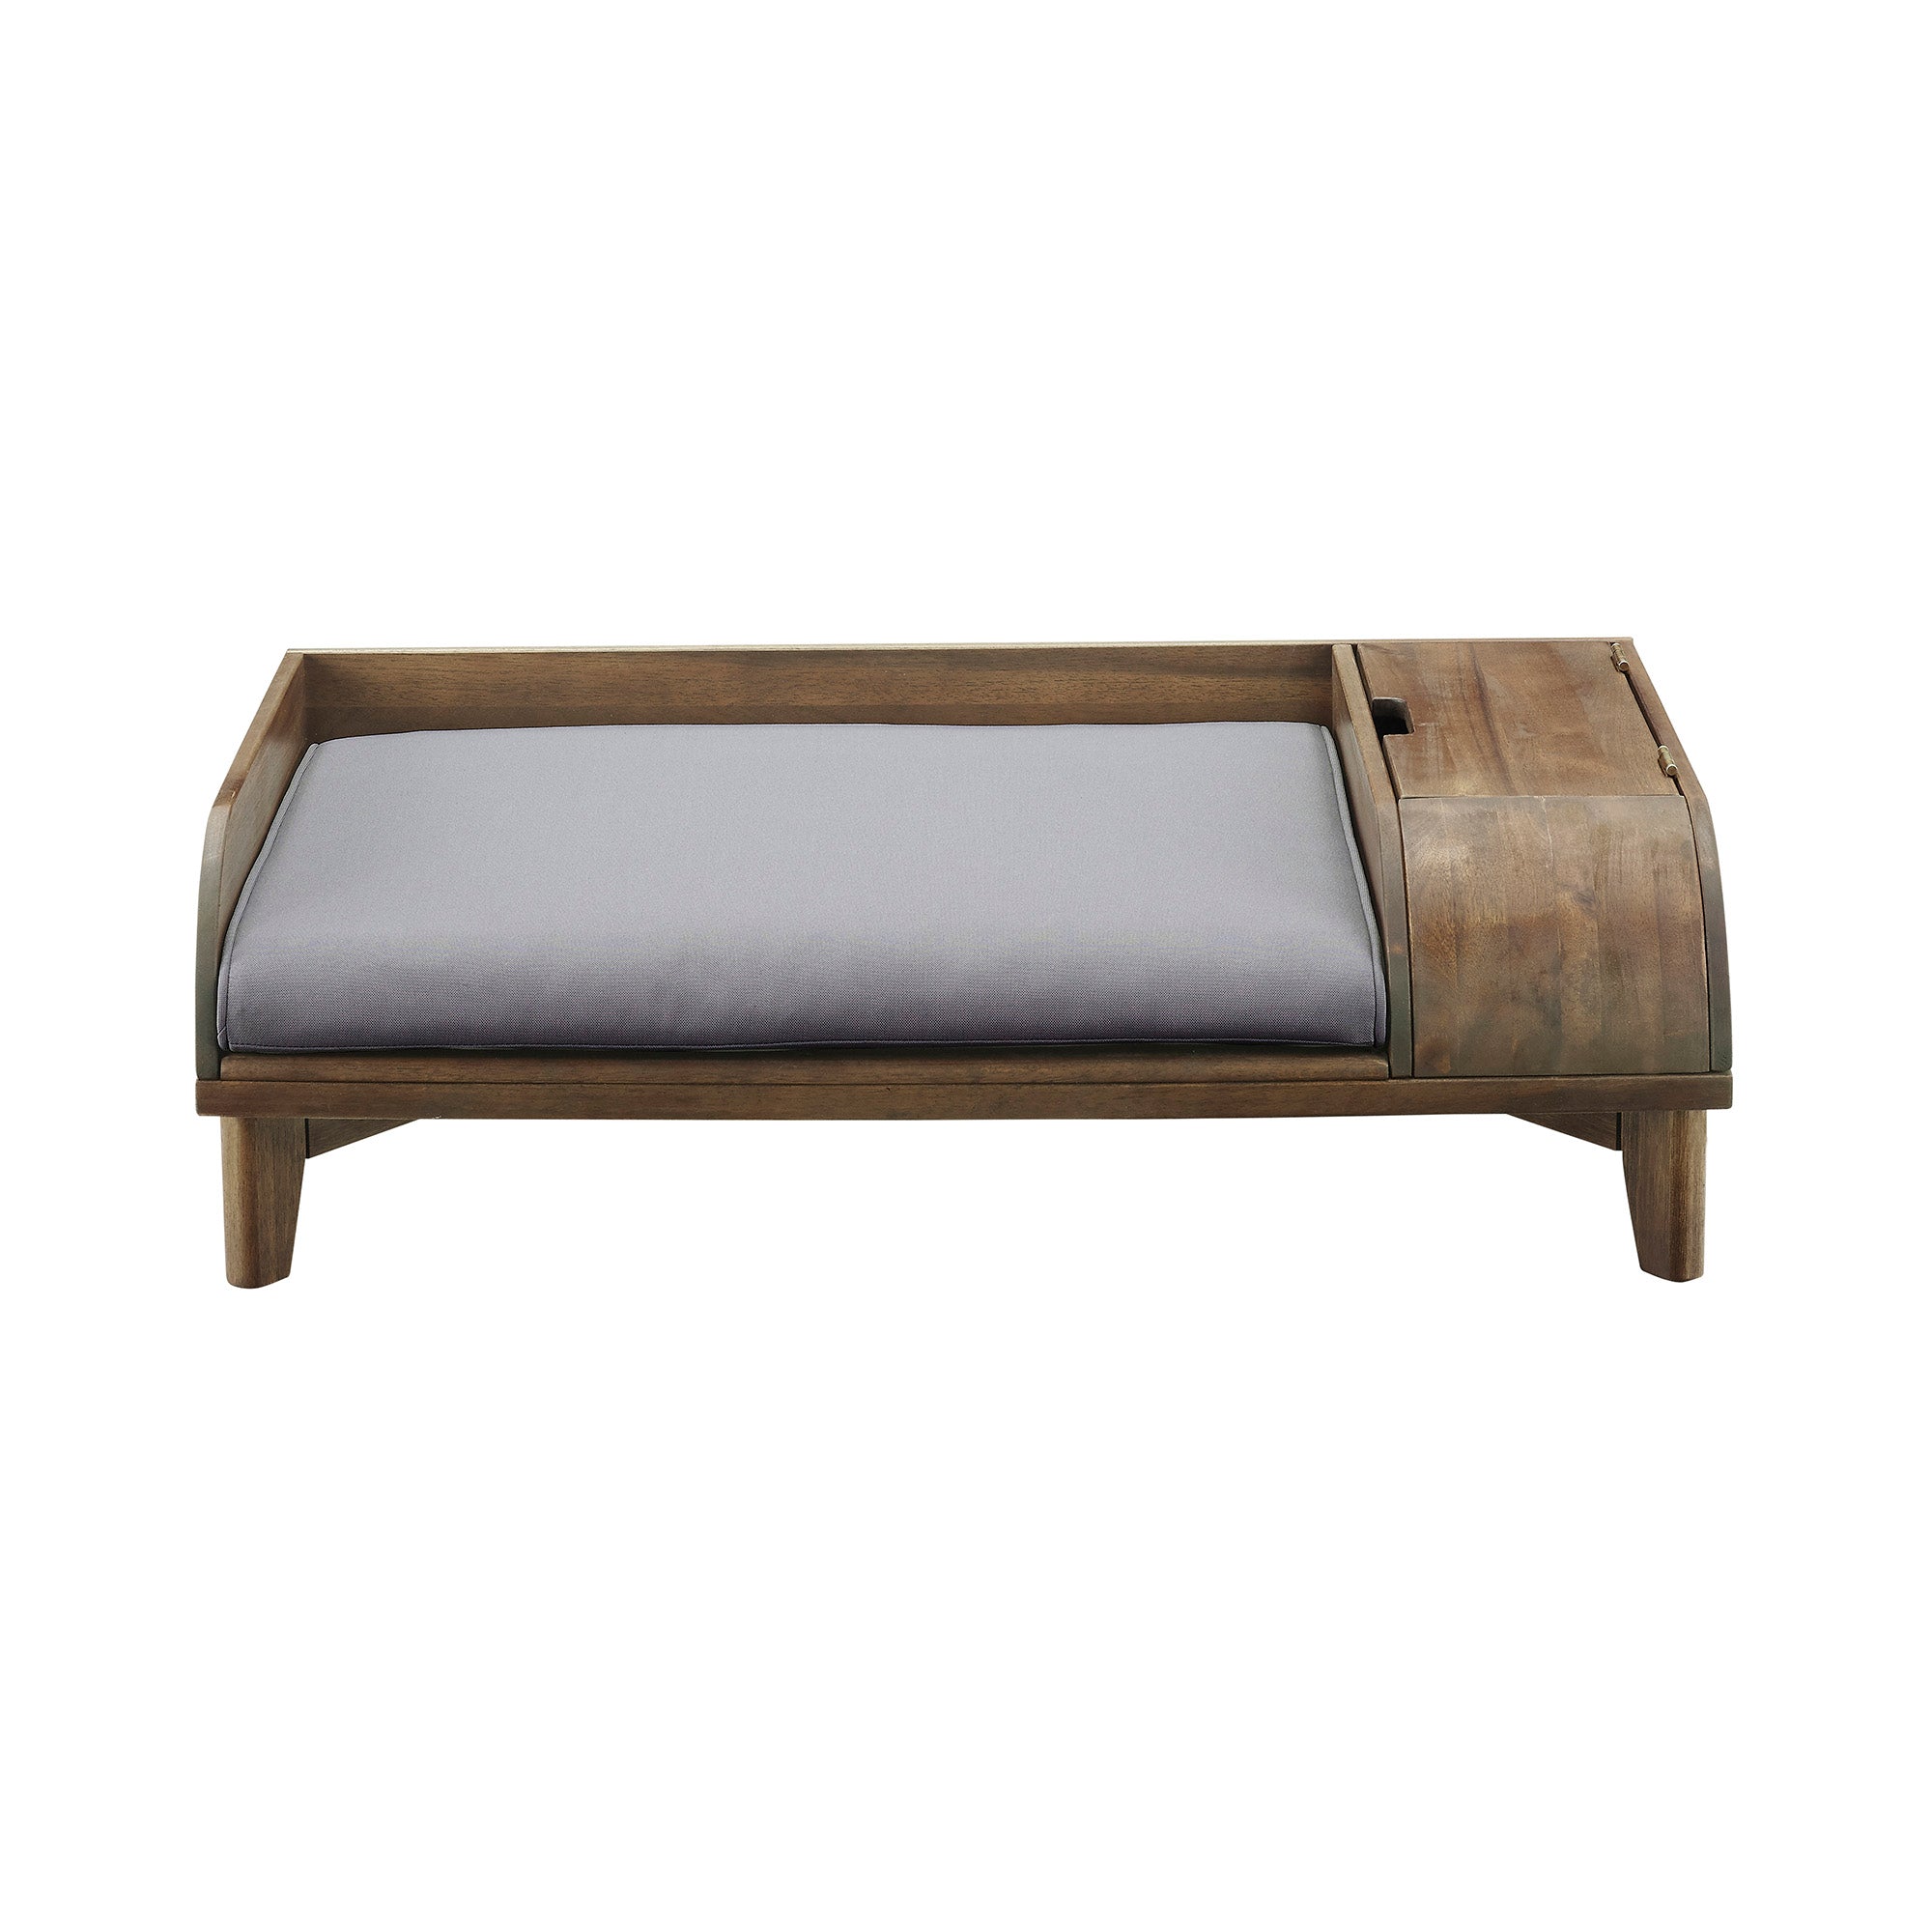 Mia Medium Solid Wood Storage Pet Bed with Cushion - East Shore Modern Home Furnishings